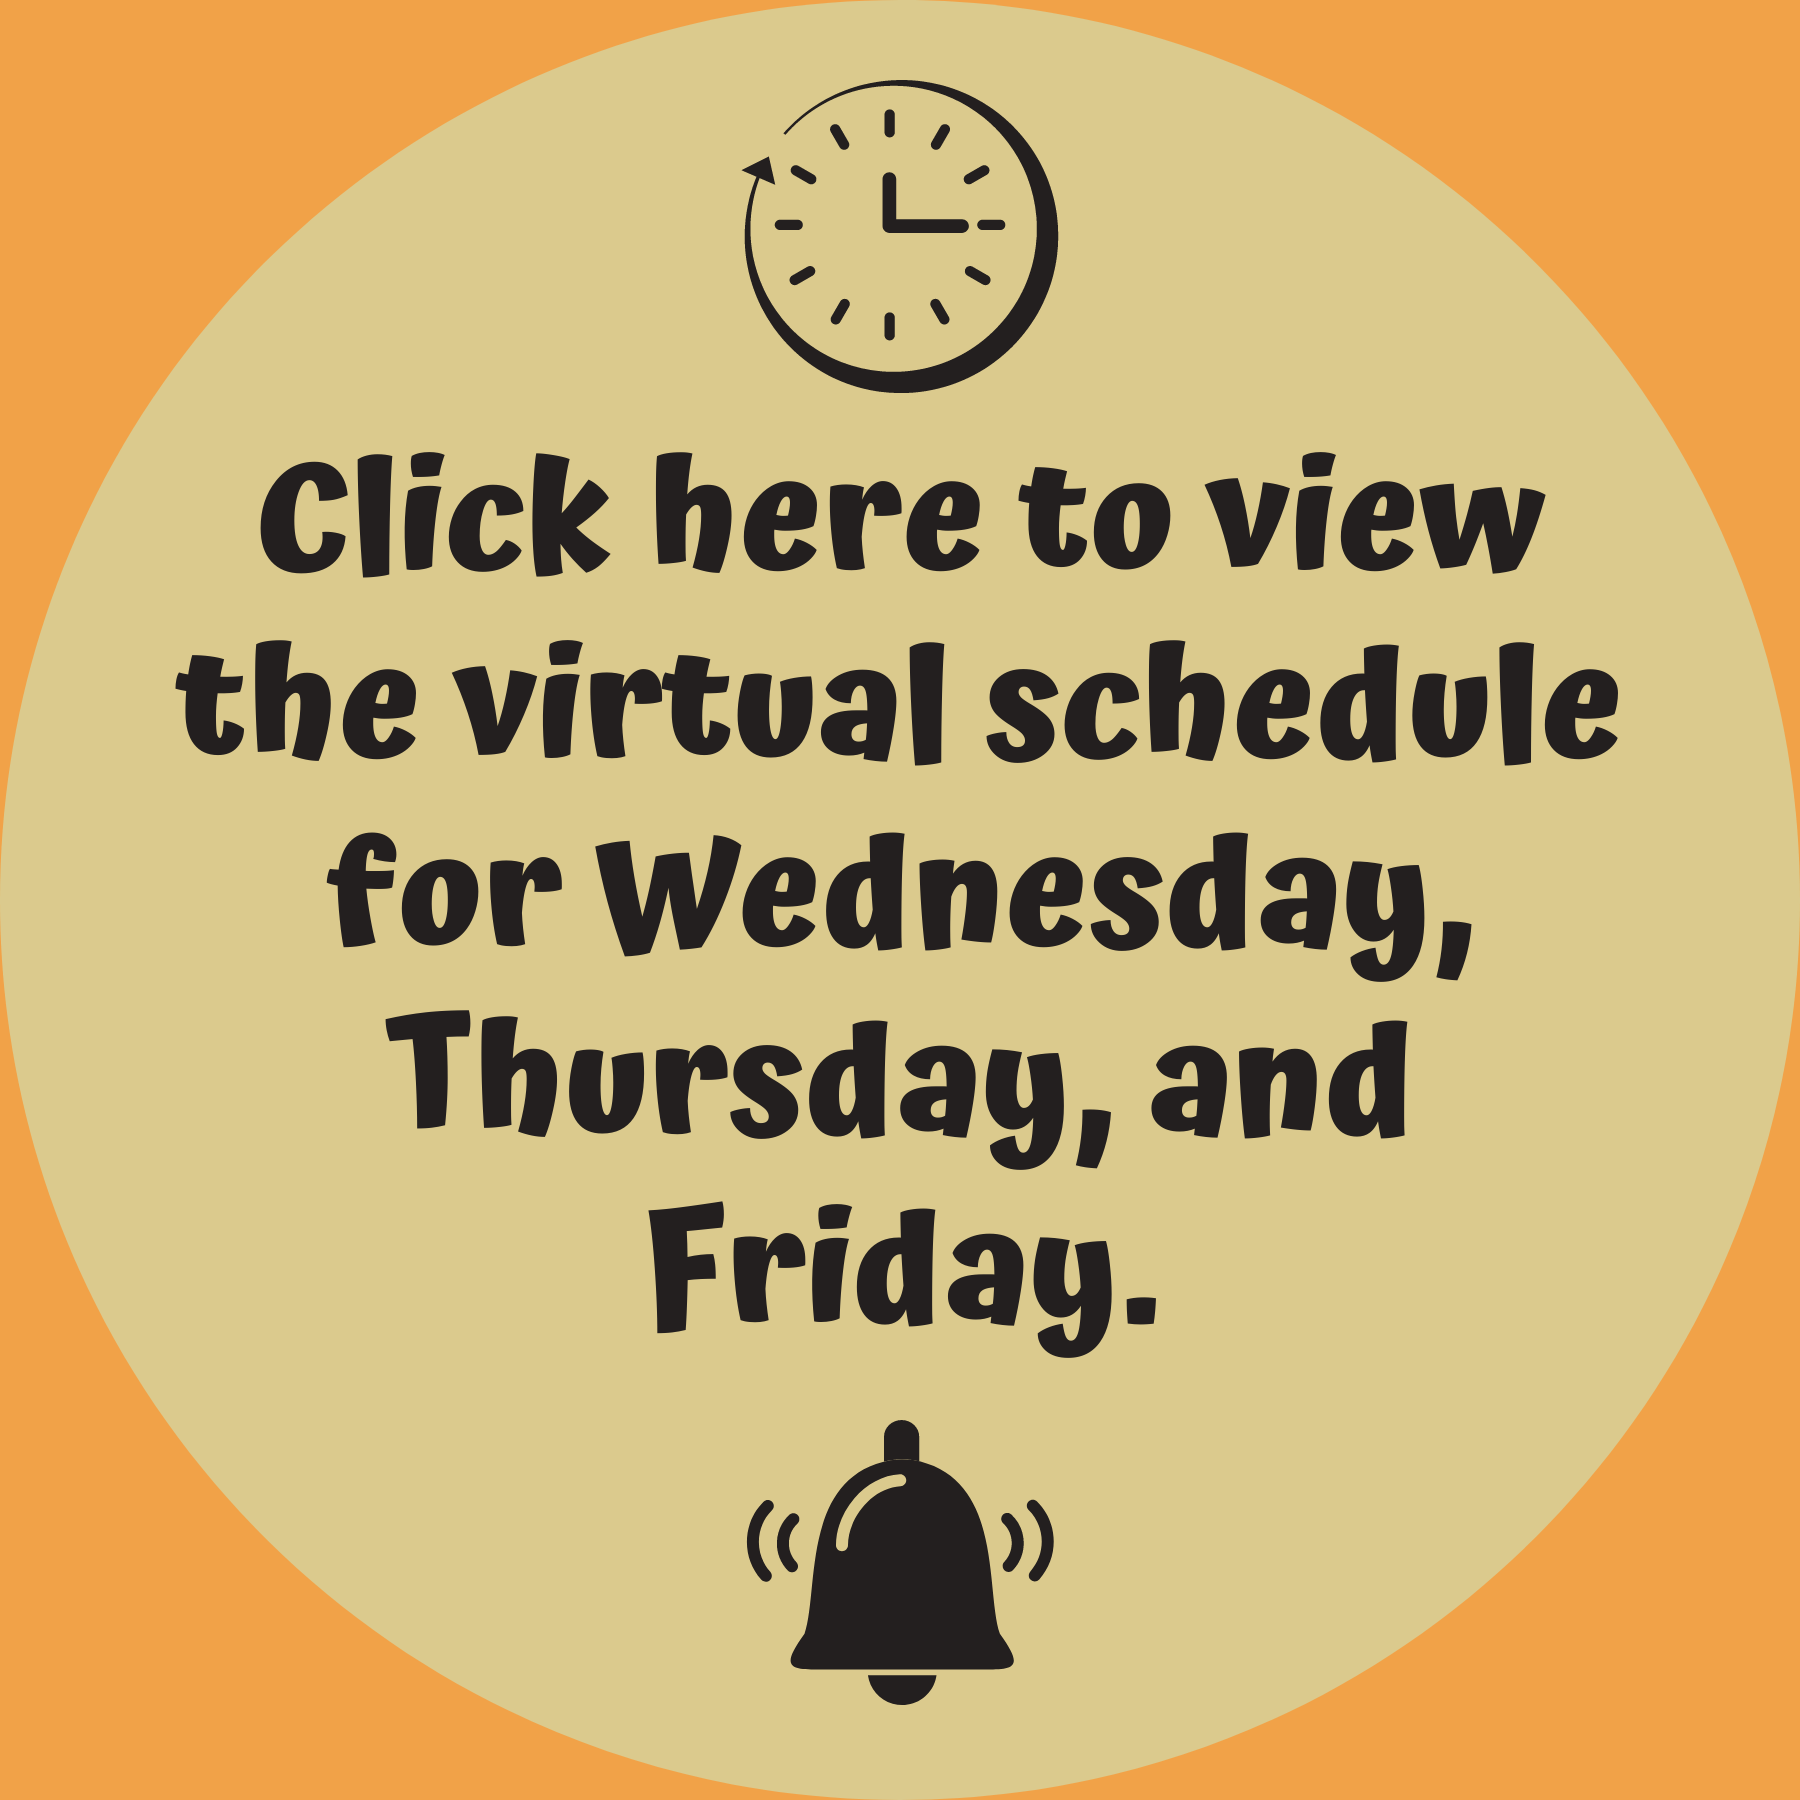 Click here for the virtual schedule for Wednesday, Thursday, and Friday.